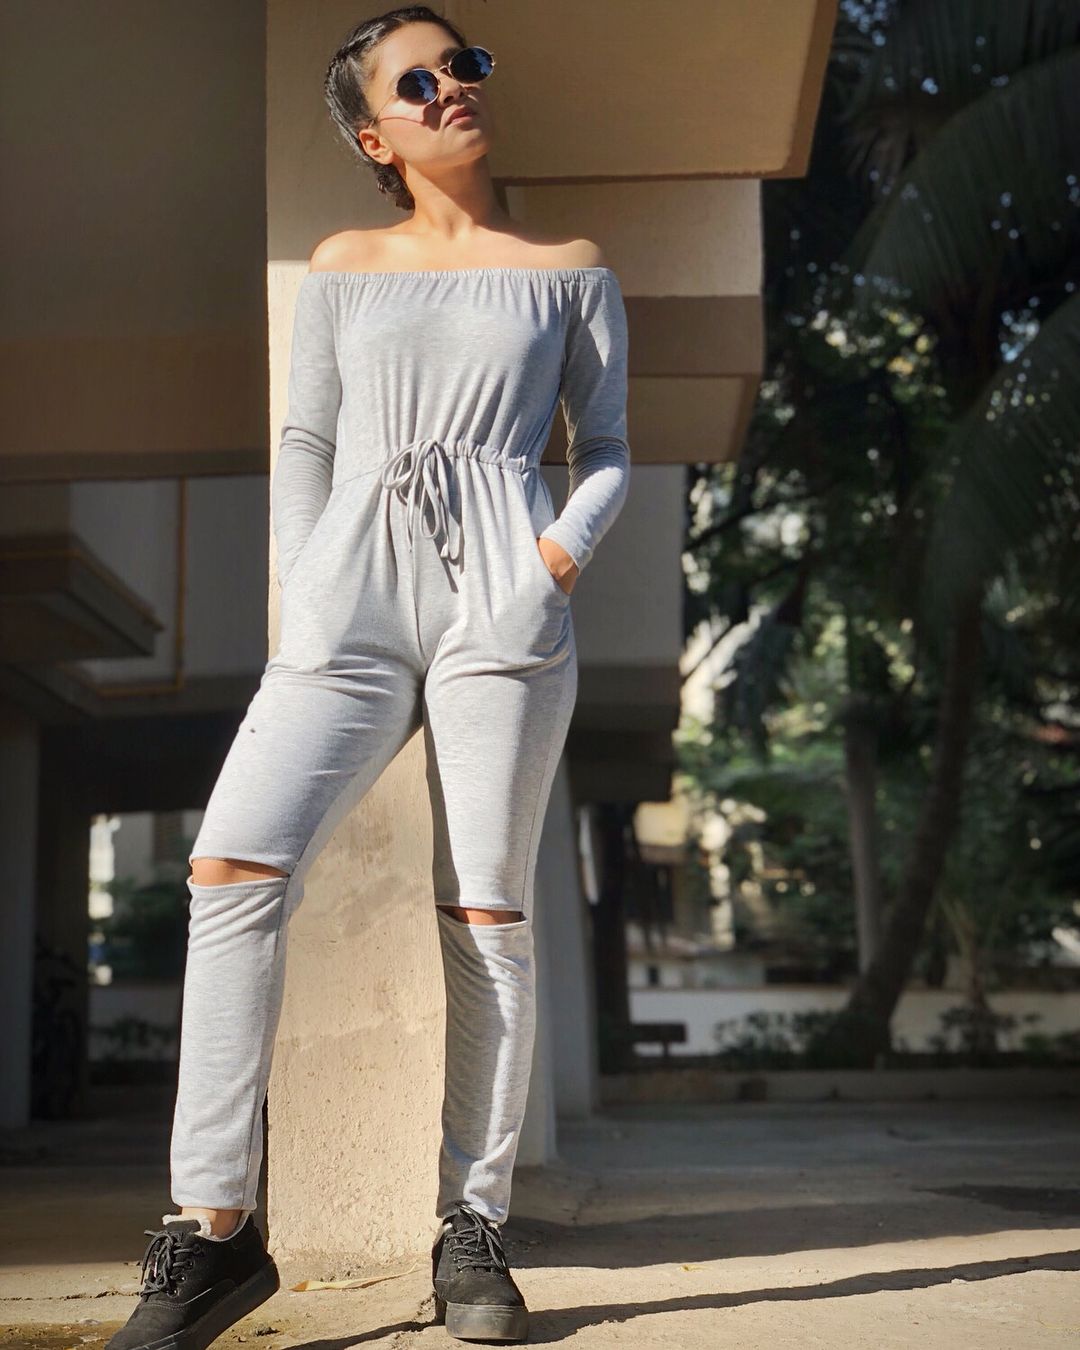 Be It A Tiger Print, Jumpsuit, A Bodycon Dress, Avneet Kaur Knows How To Be Sassy and Bold